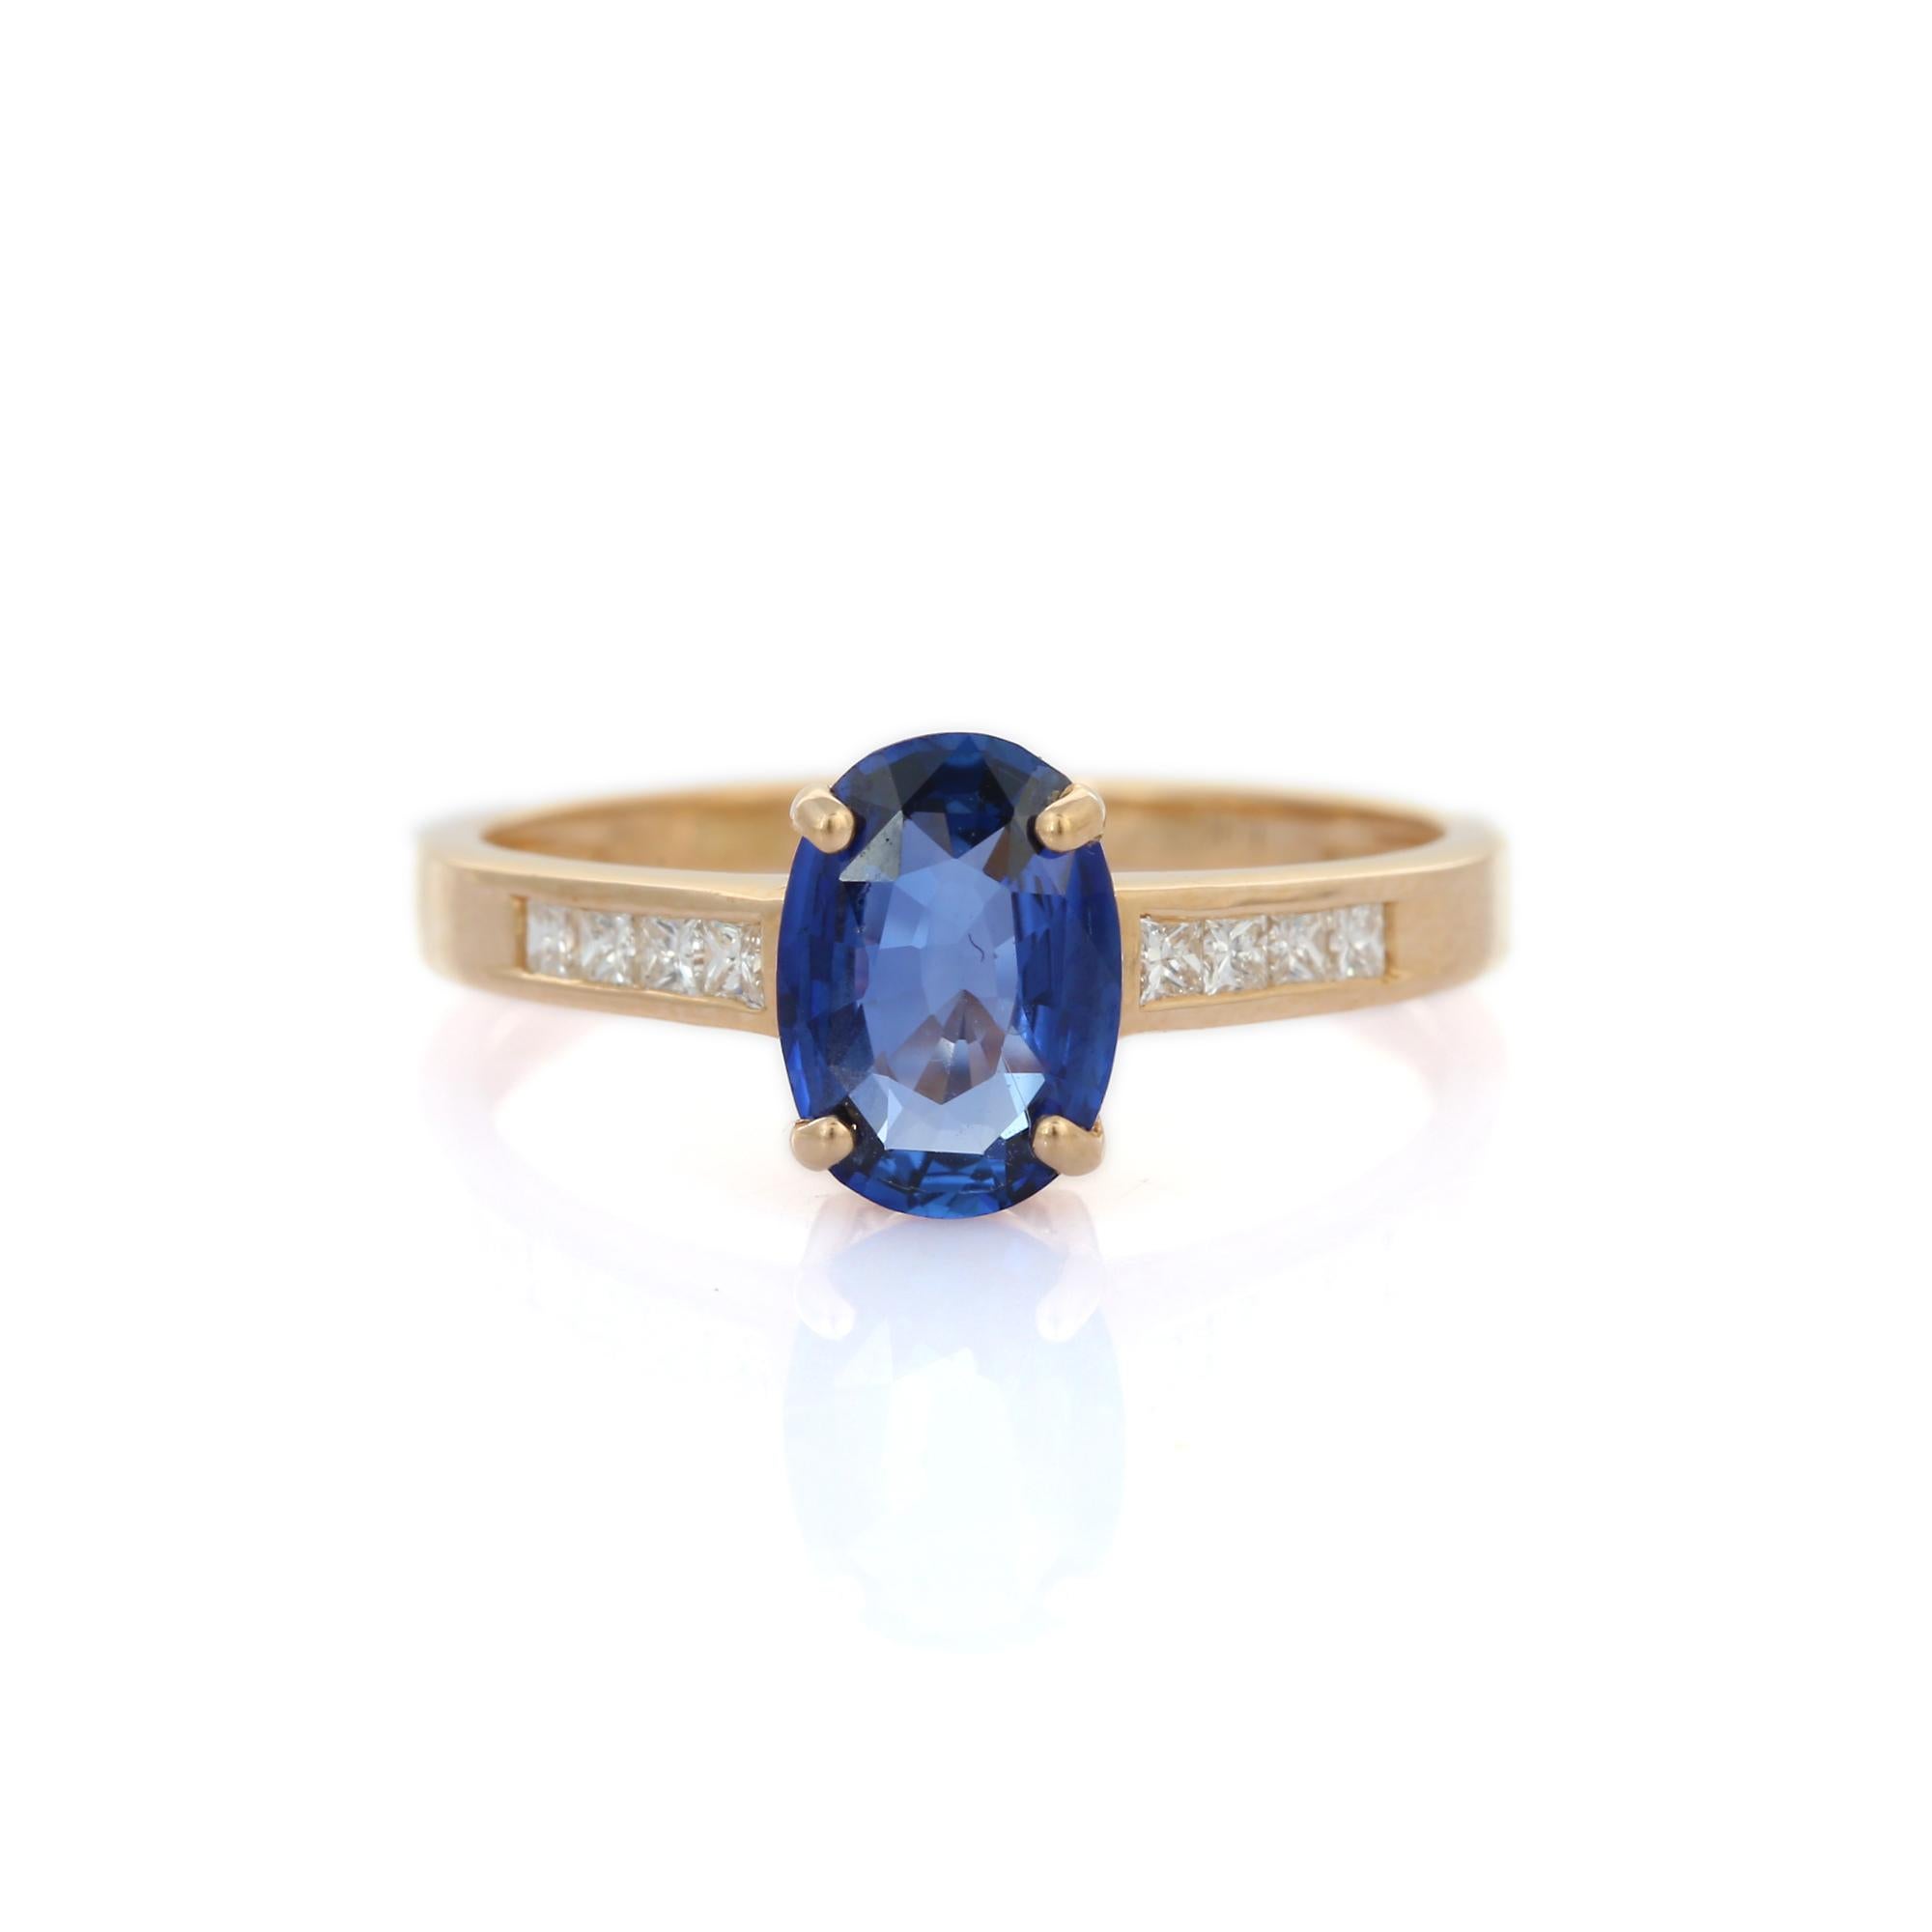 For Sale:  Solitaire Oval Blue Sapphire Diamond Engagement Ring in 14k Solid Yellow Gold 2